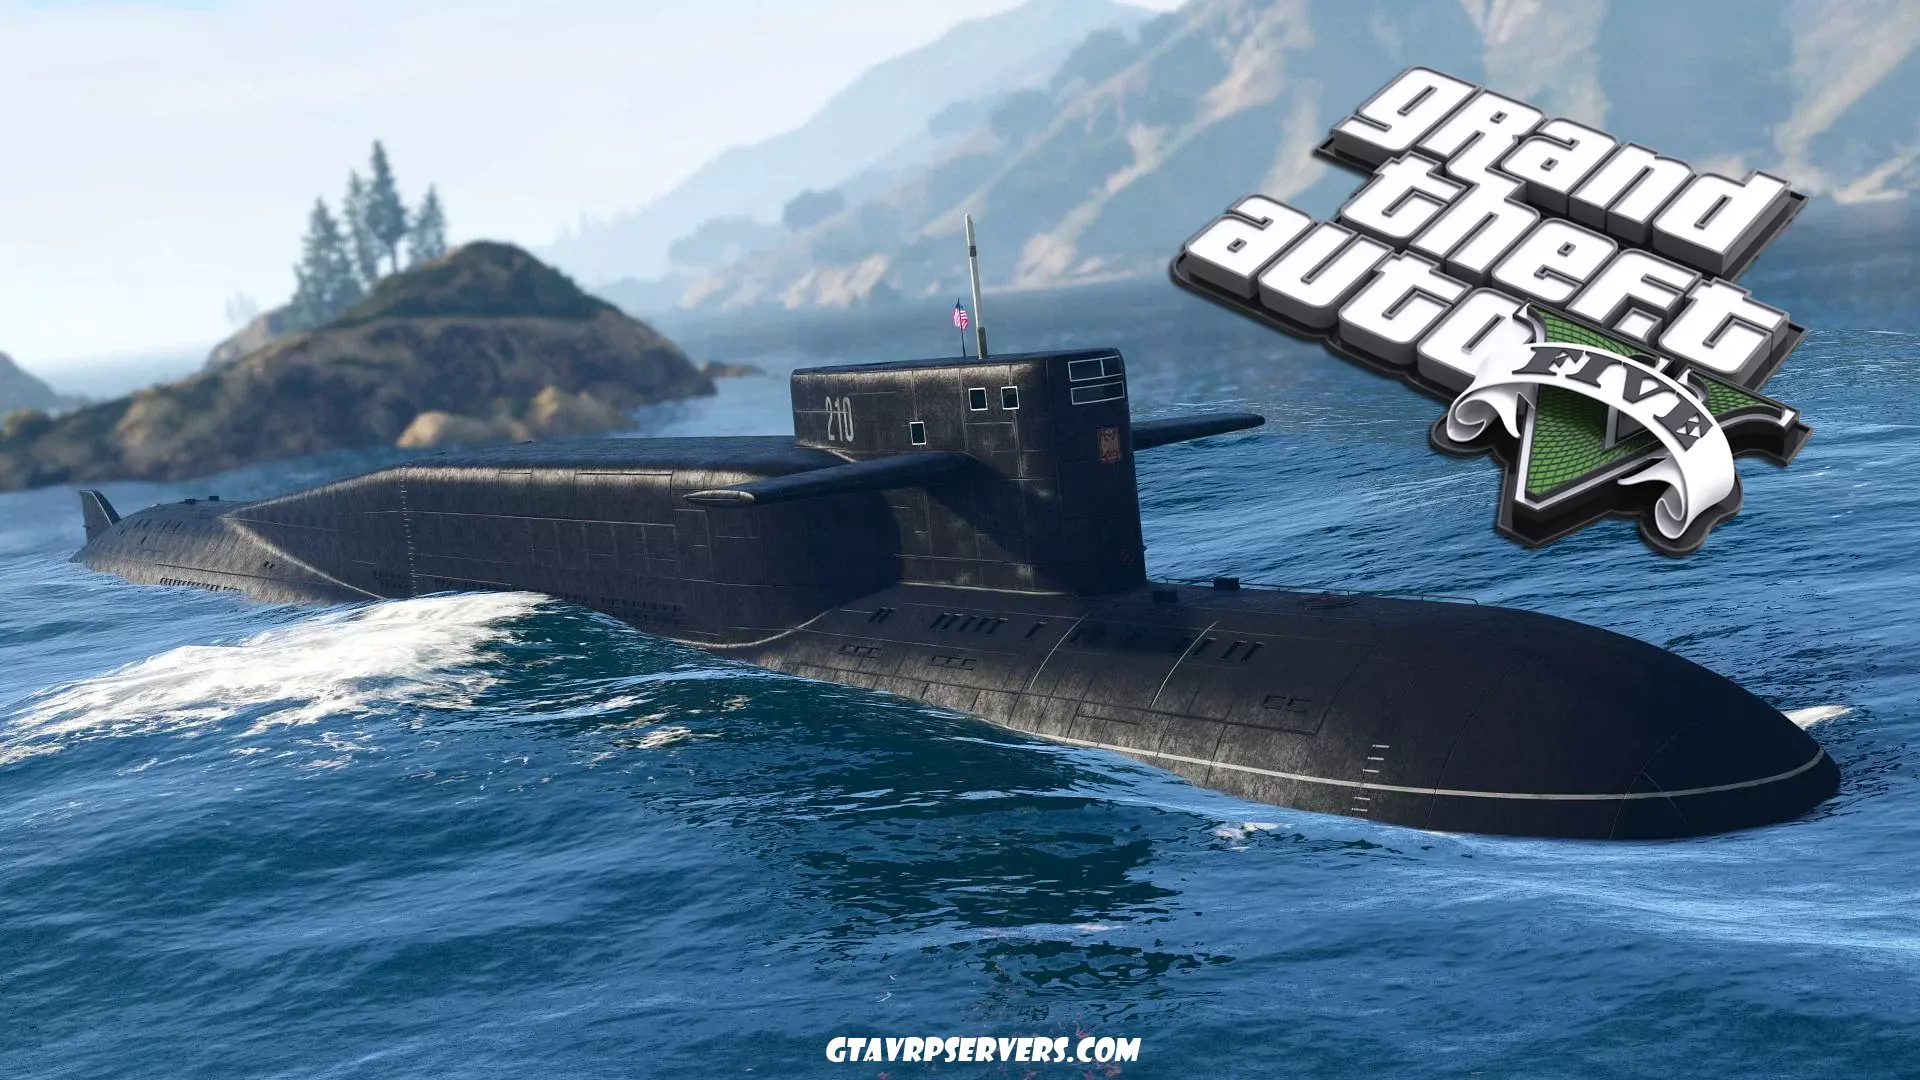 Top 5 submarine mods for GTA 5 in 2023, ranked